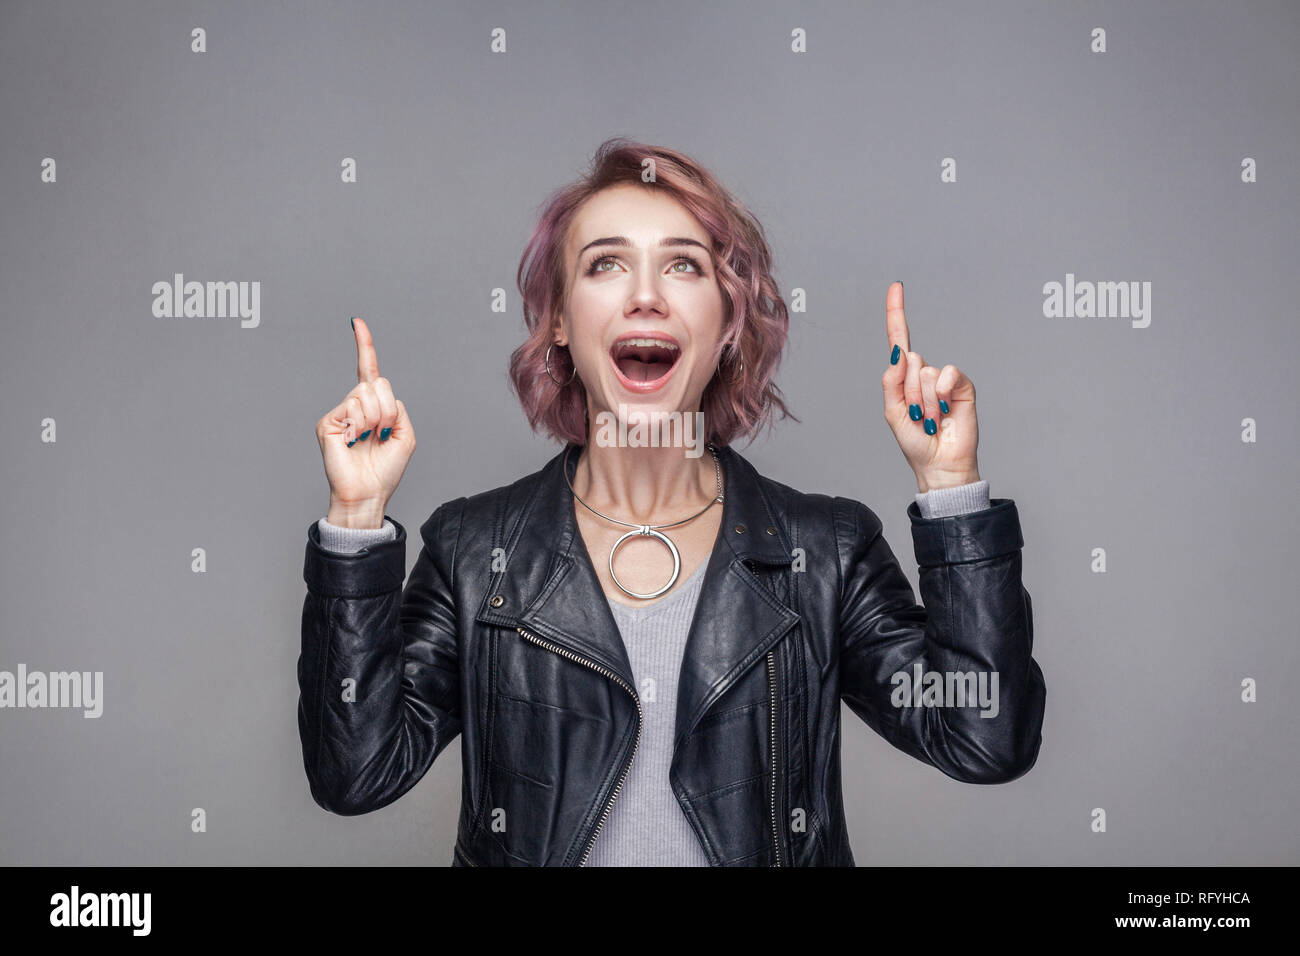 Portrait of amazed beautiful girl with short hairstyle and makeup in casual style black leather jacket standing, looking up and pointing at copyspace. Stock Photo